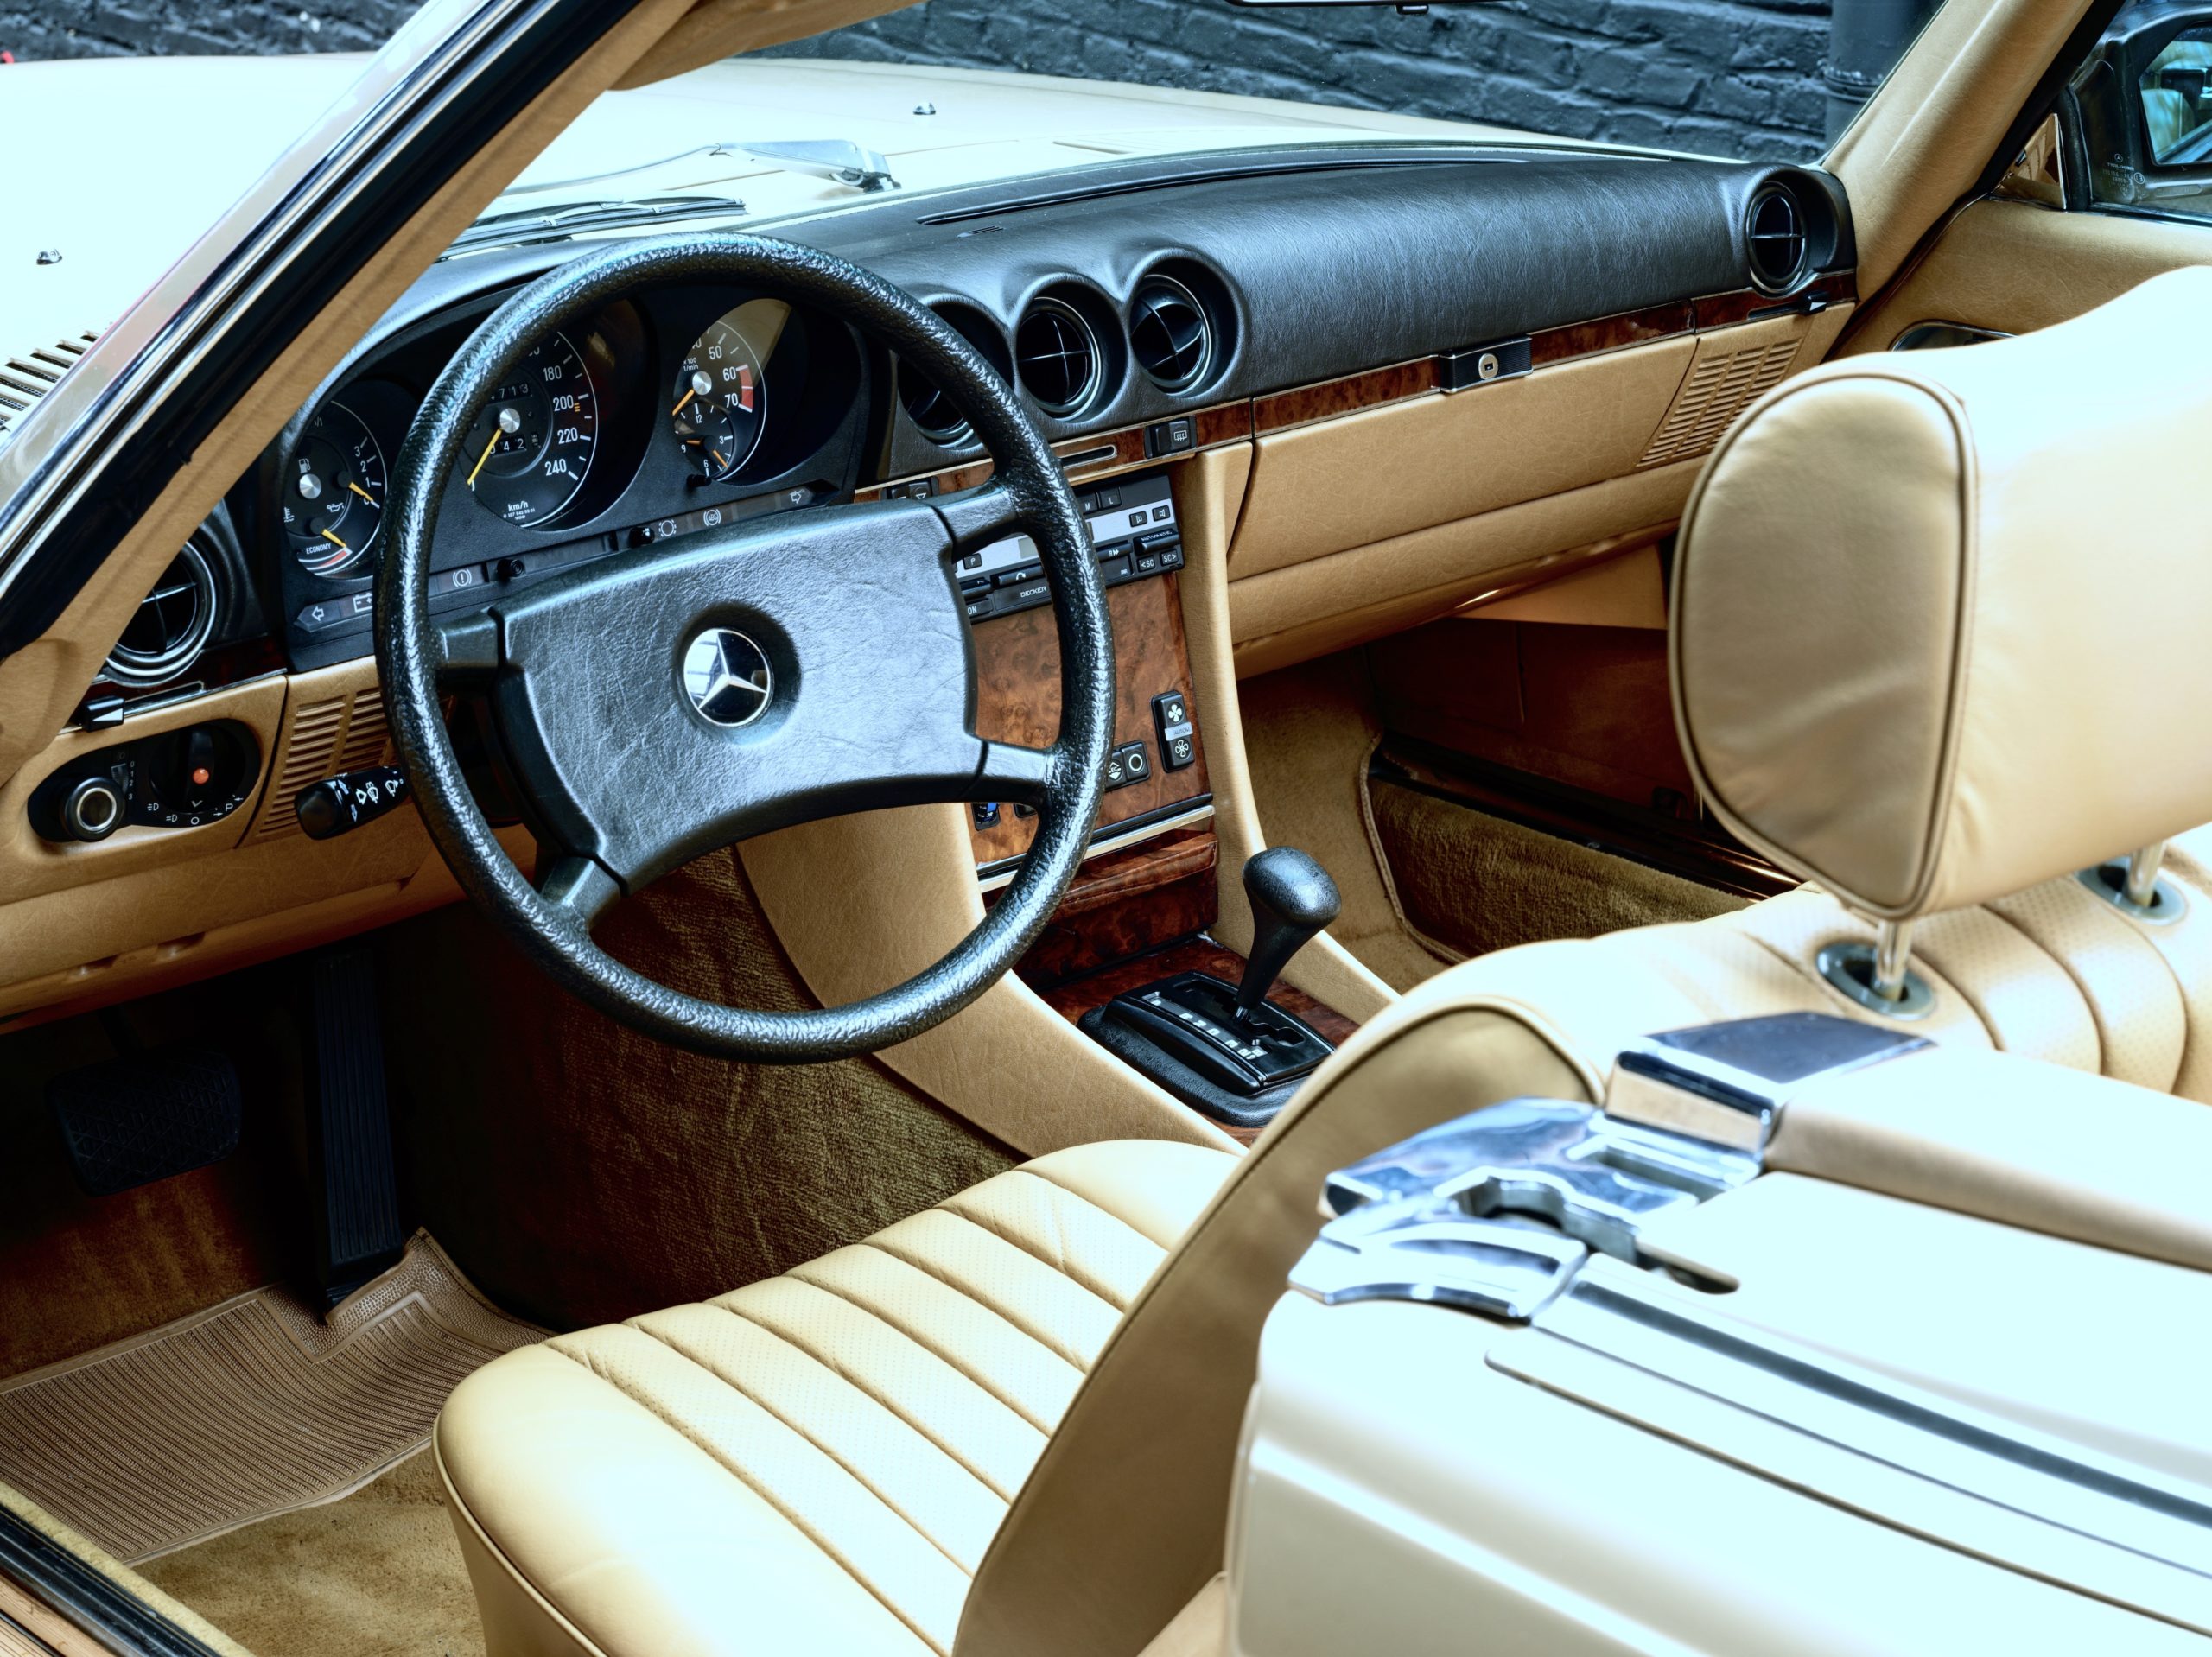 Photo of a 1983 automatic Mercedes 380 SL for sale at Classic 42, the Classic Car Specialist in Belgium